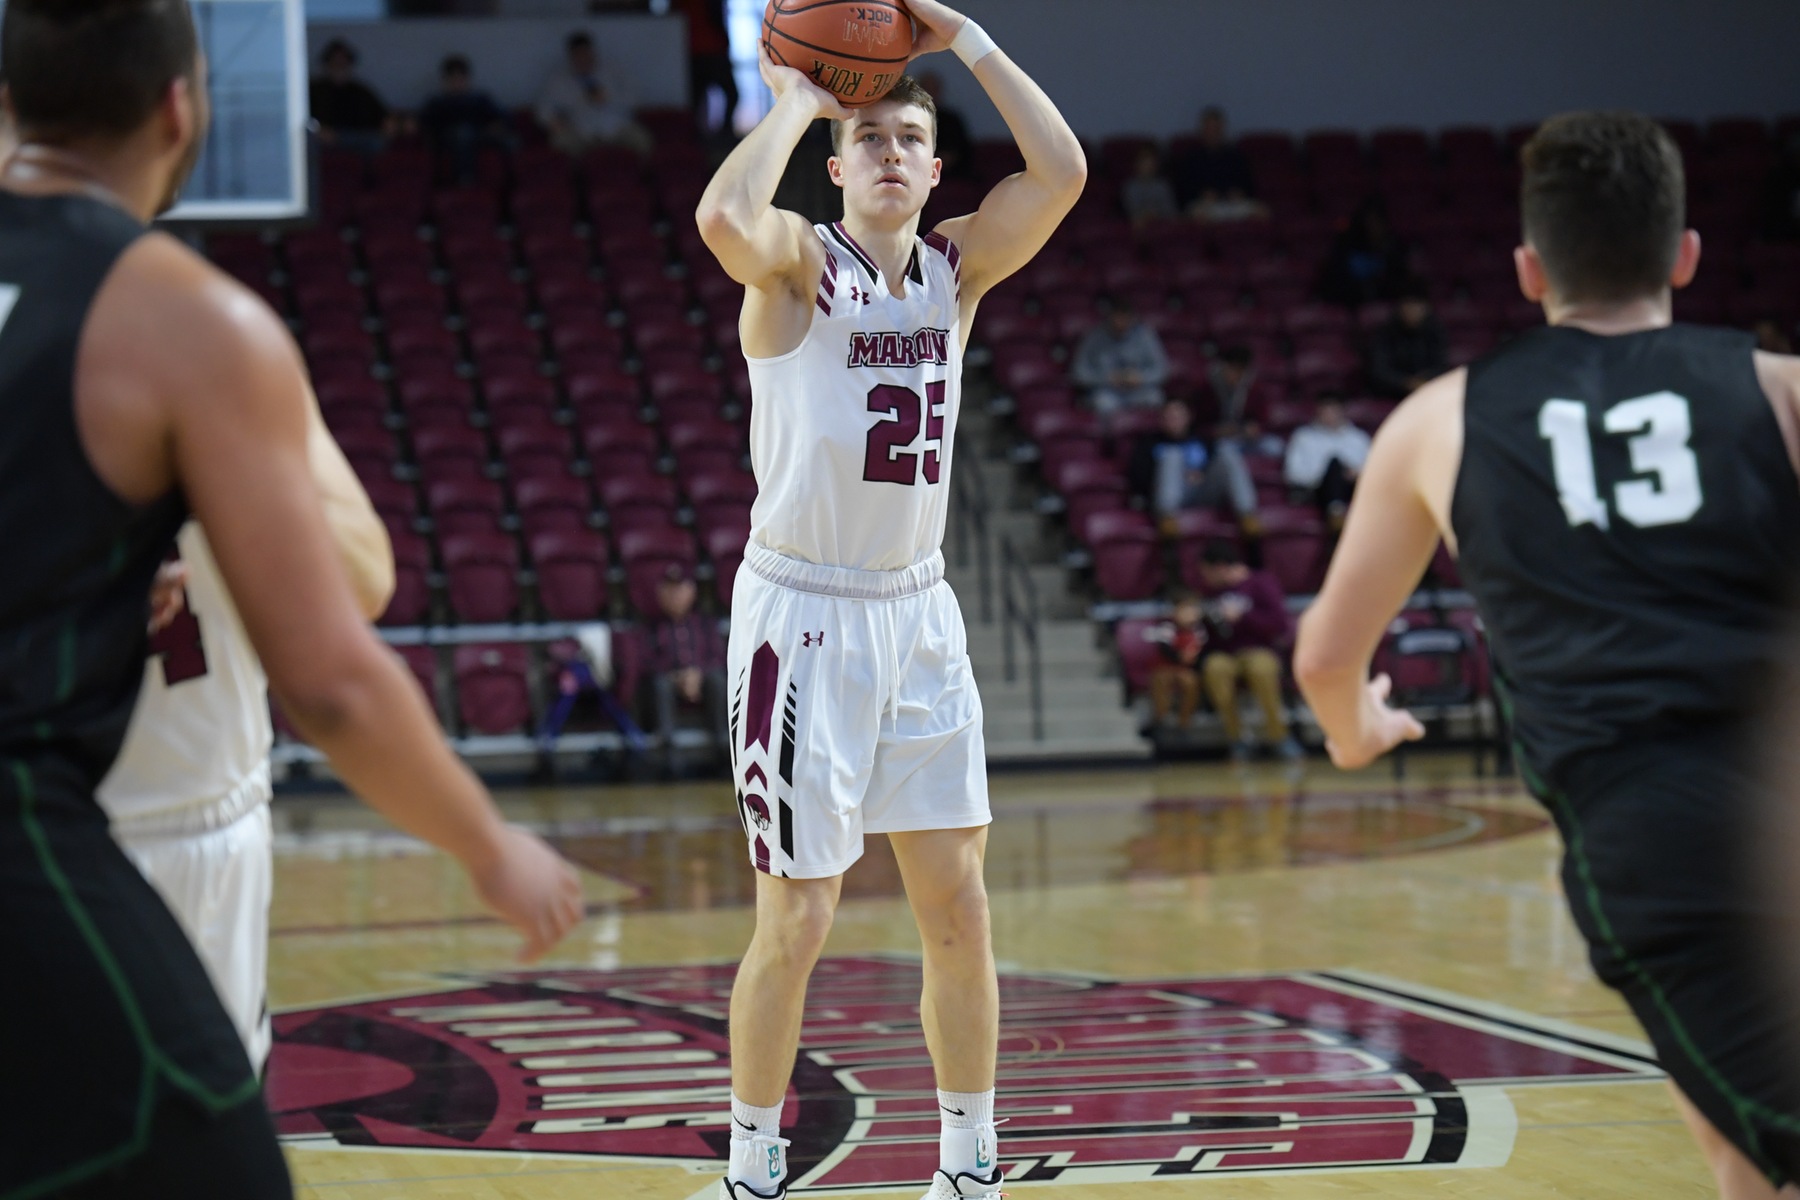 Four players scored in double-figures as Roanoke ran its win streak to seven games with an 80-67 victory over Ferrum on Wednesday.